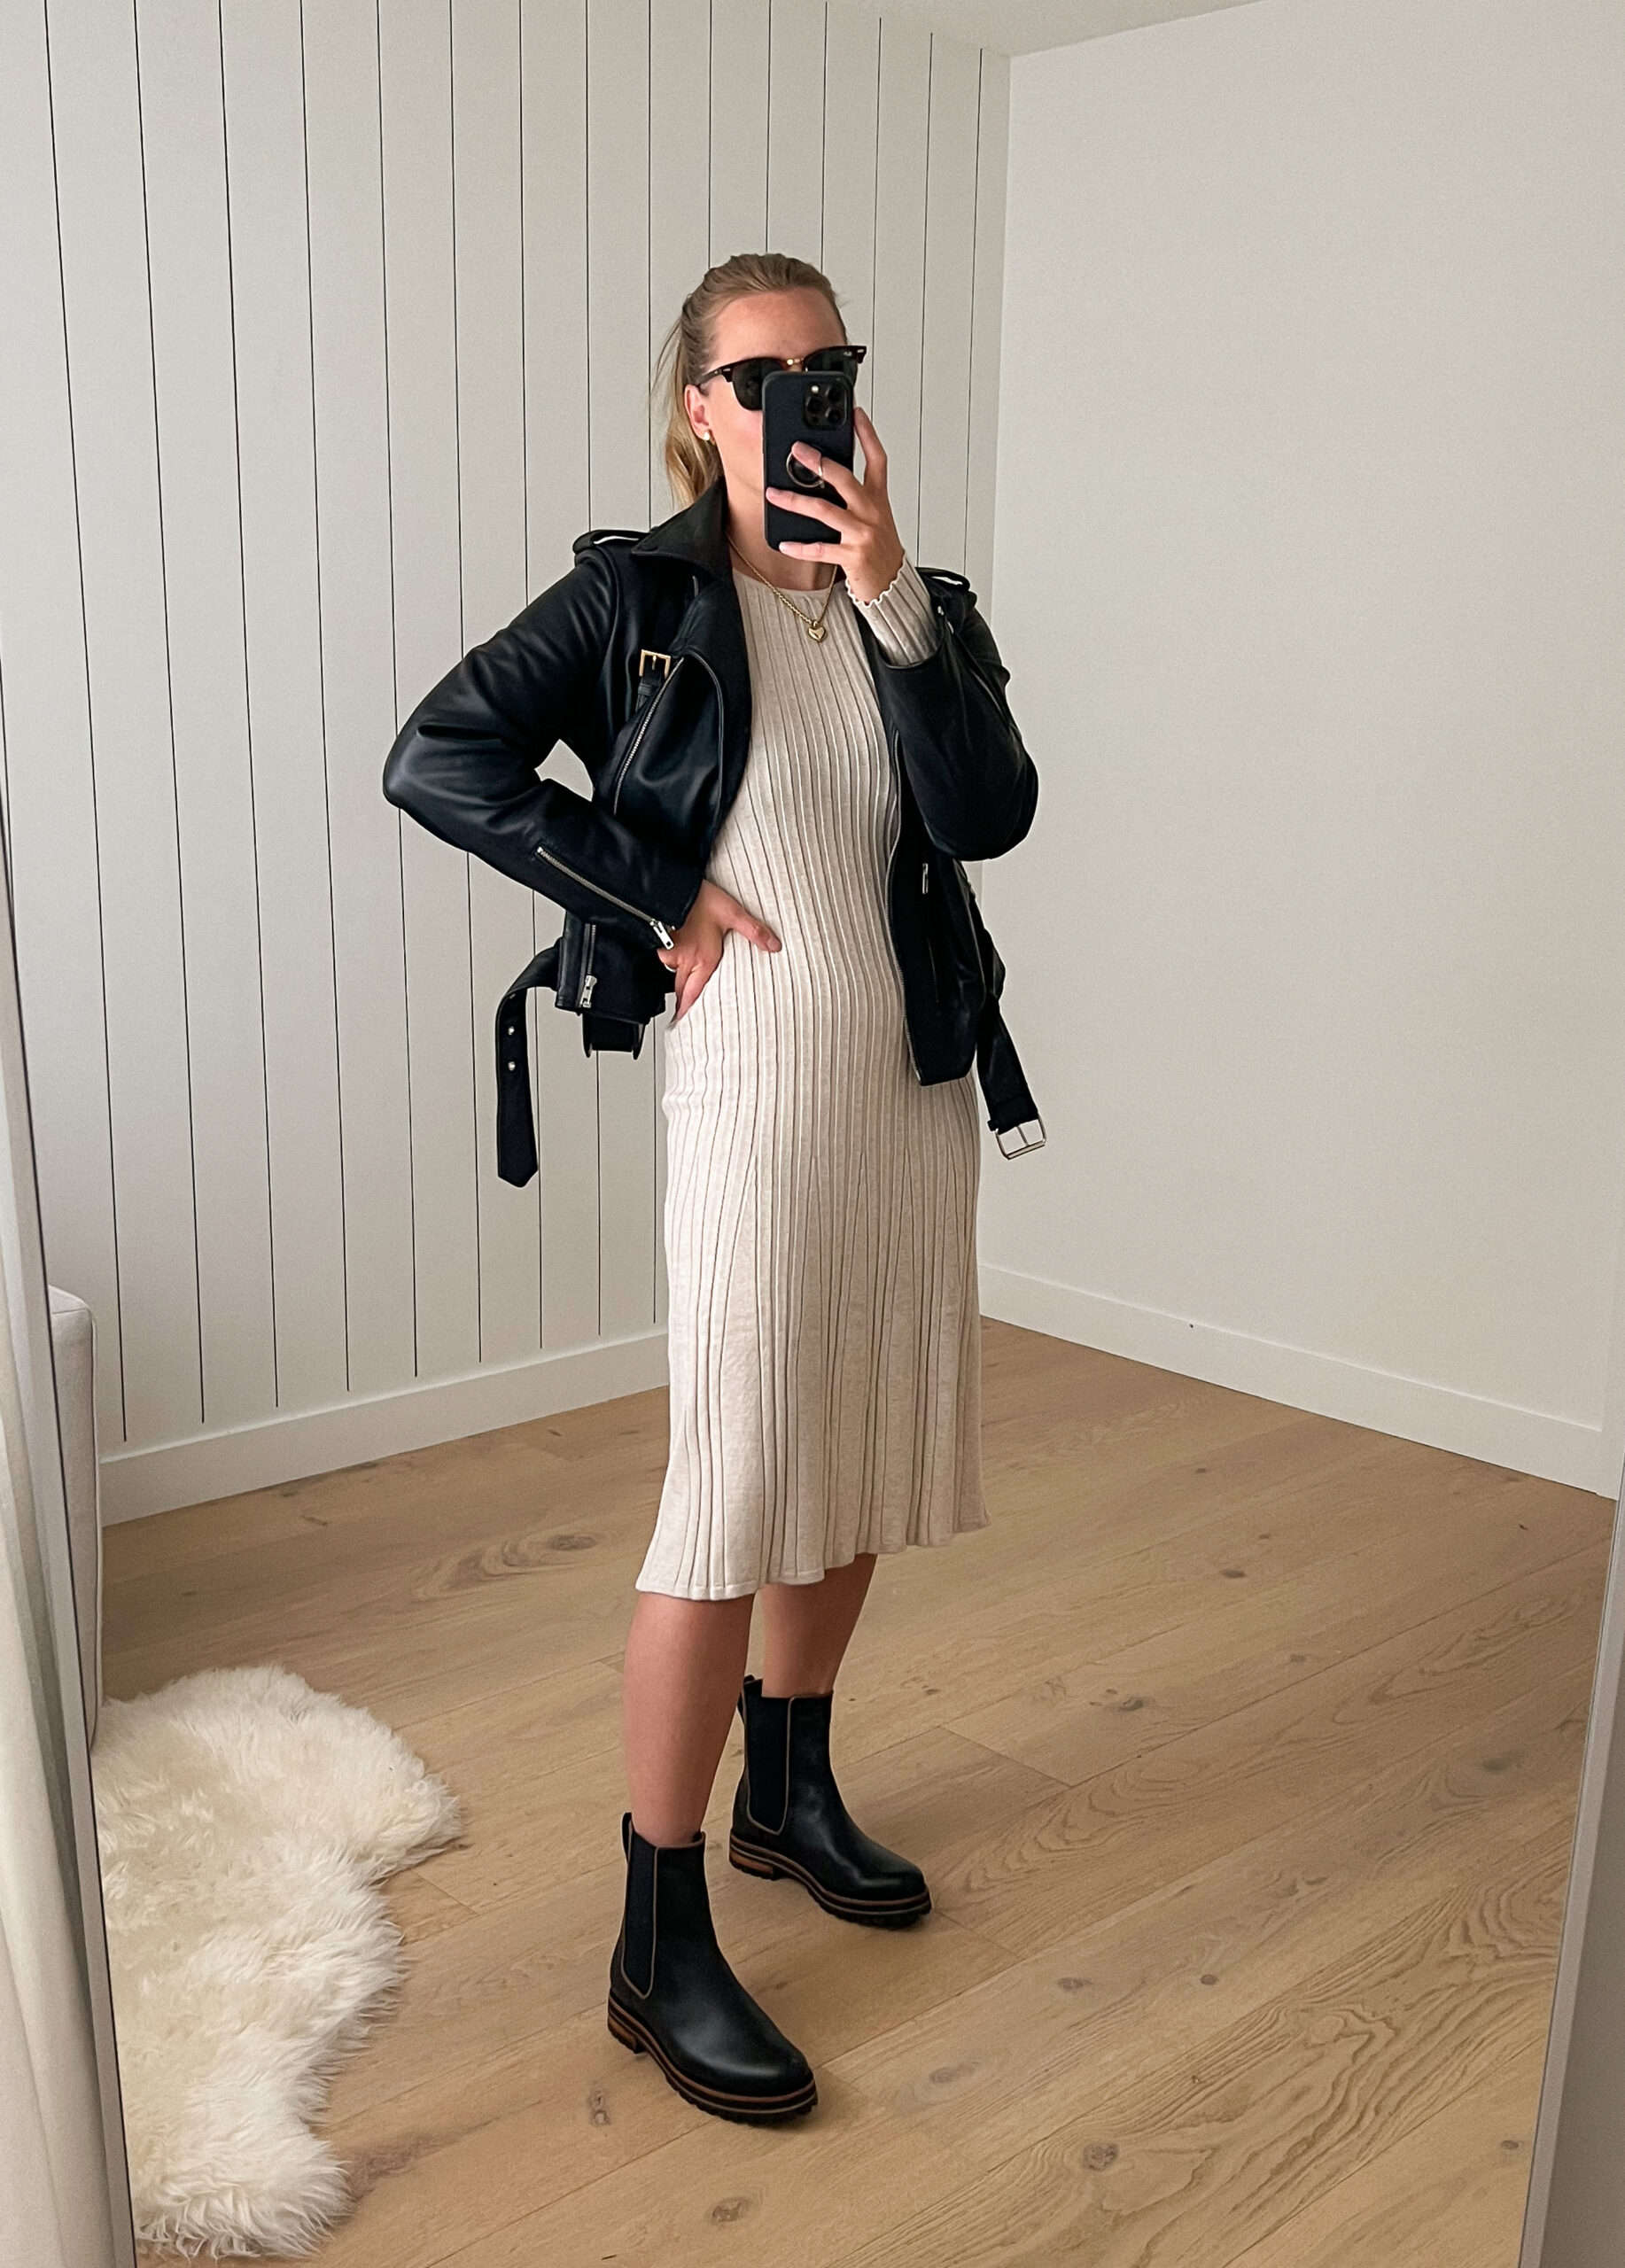 Christal wearing a beige knit midi sweater dress with a leather jacket and black chelsea boots for a fall date night